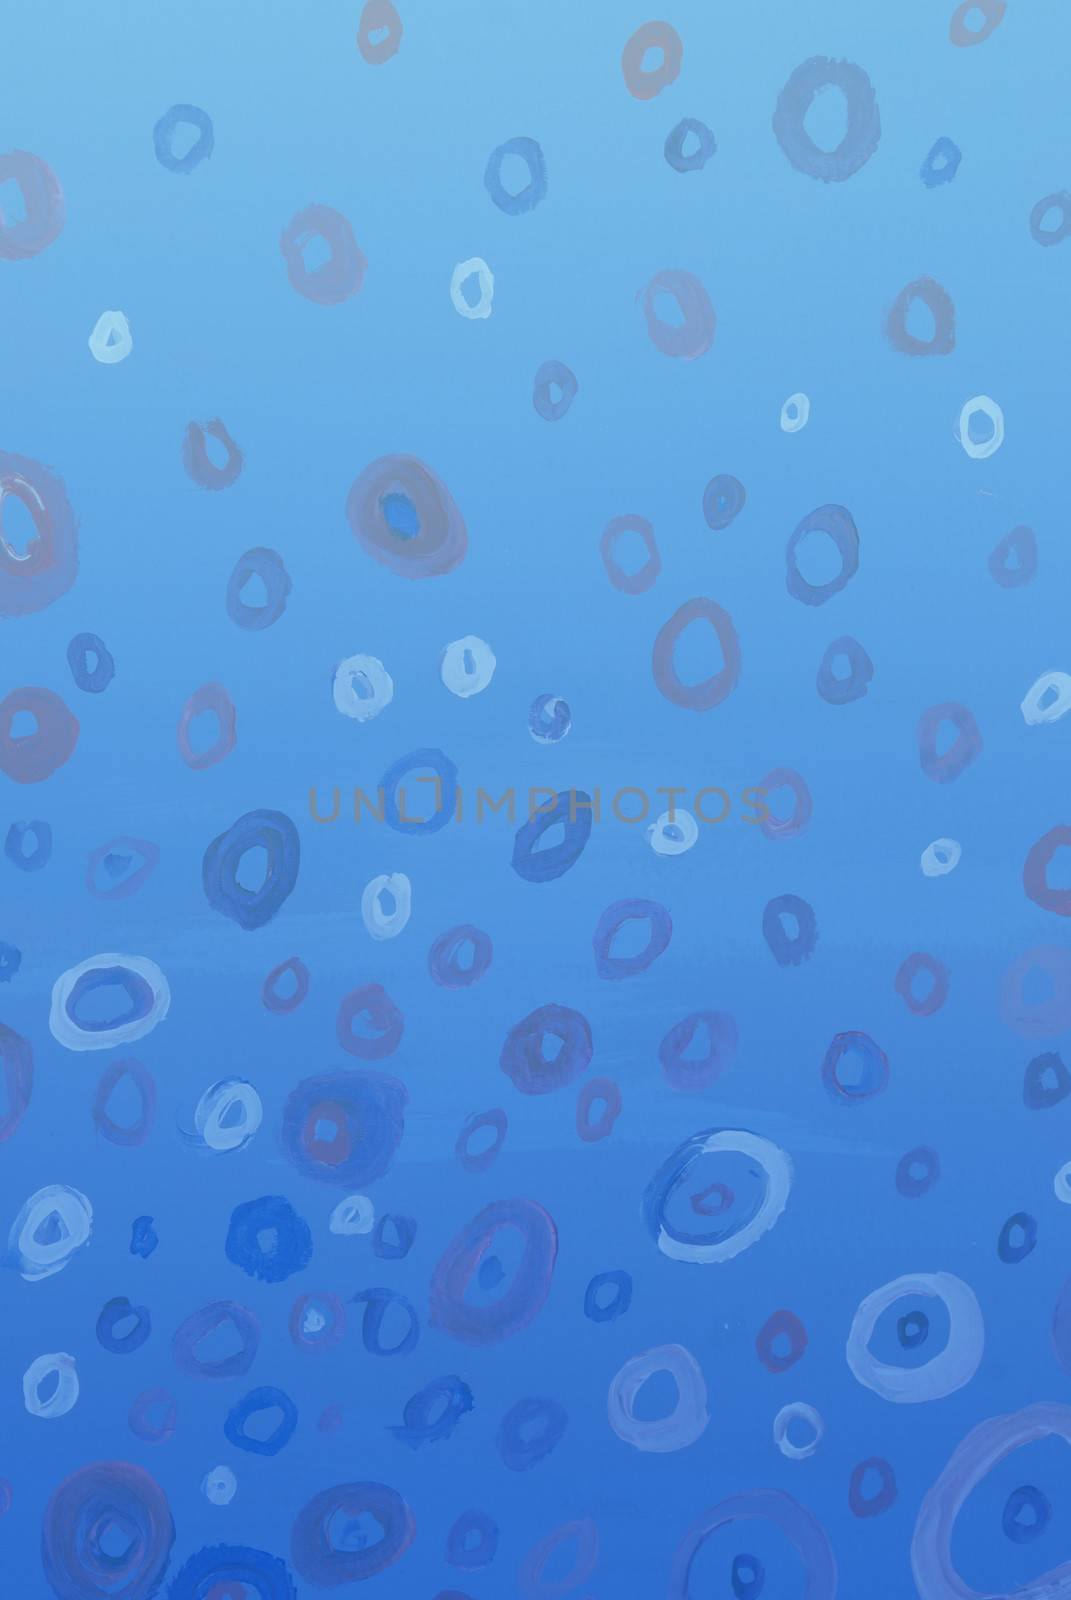 An abstract watercolor painting of circles surrounded by blue gradient wash. Property Release on file.